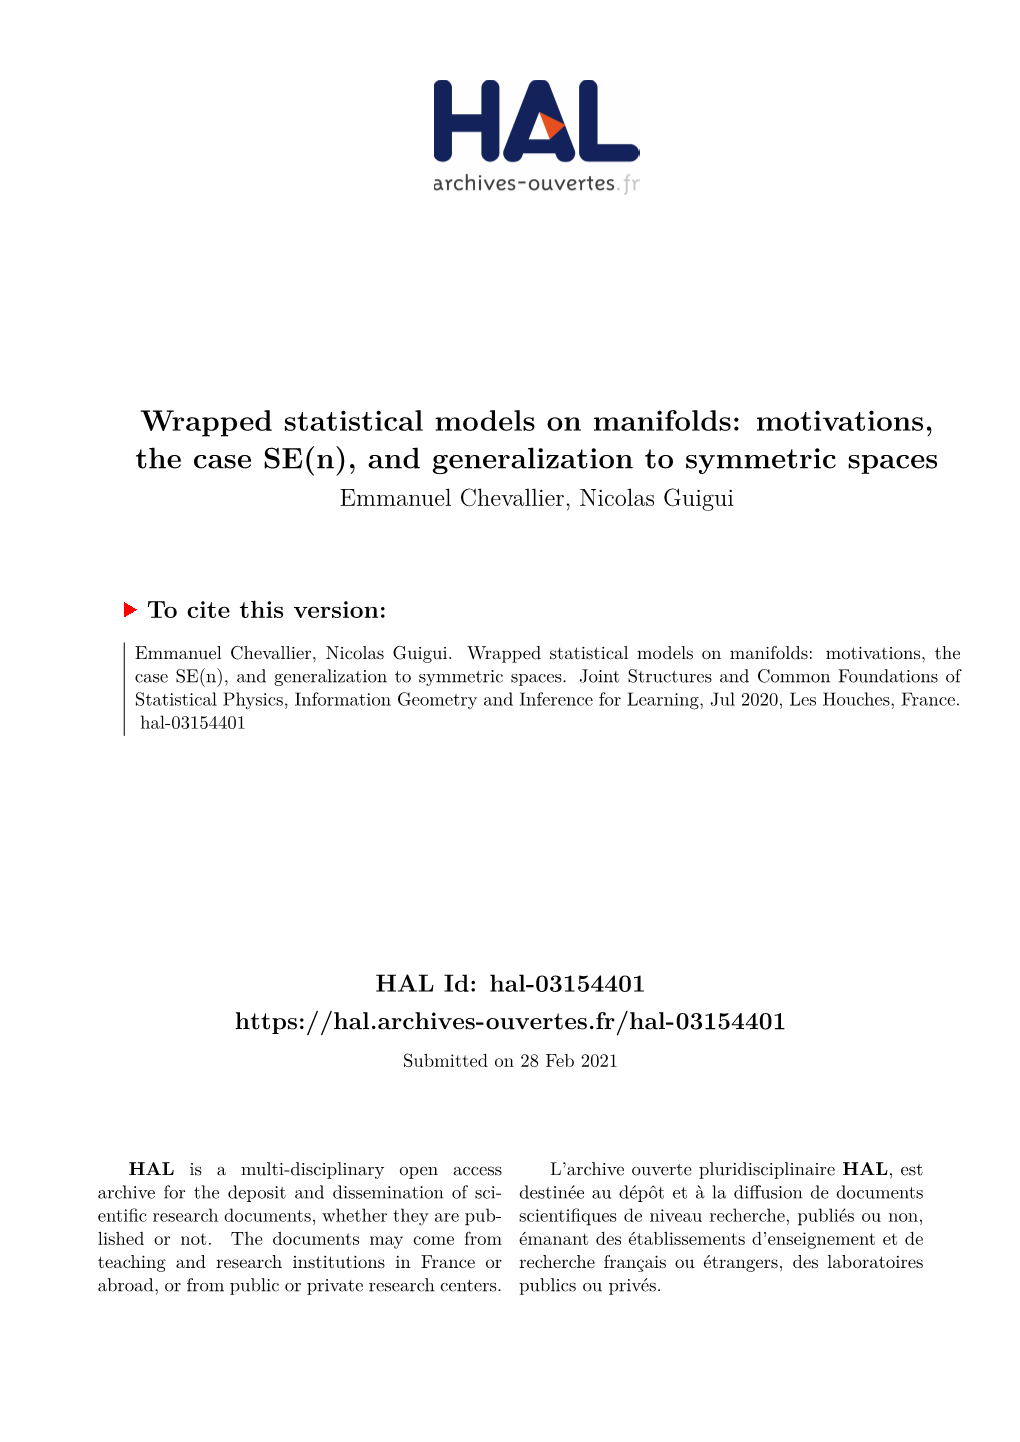 Wrapped Statistical Models on Manifolds: Motivations, the Case SE(N), and Generalization to Symmetric Spaces Emmanuel Chevallier, Nicolas Guigui